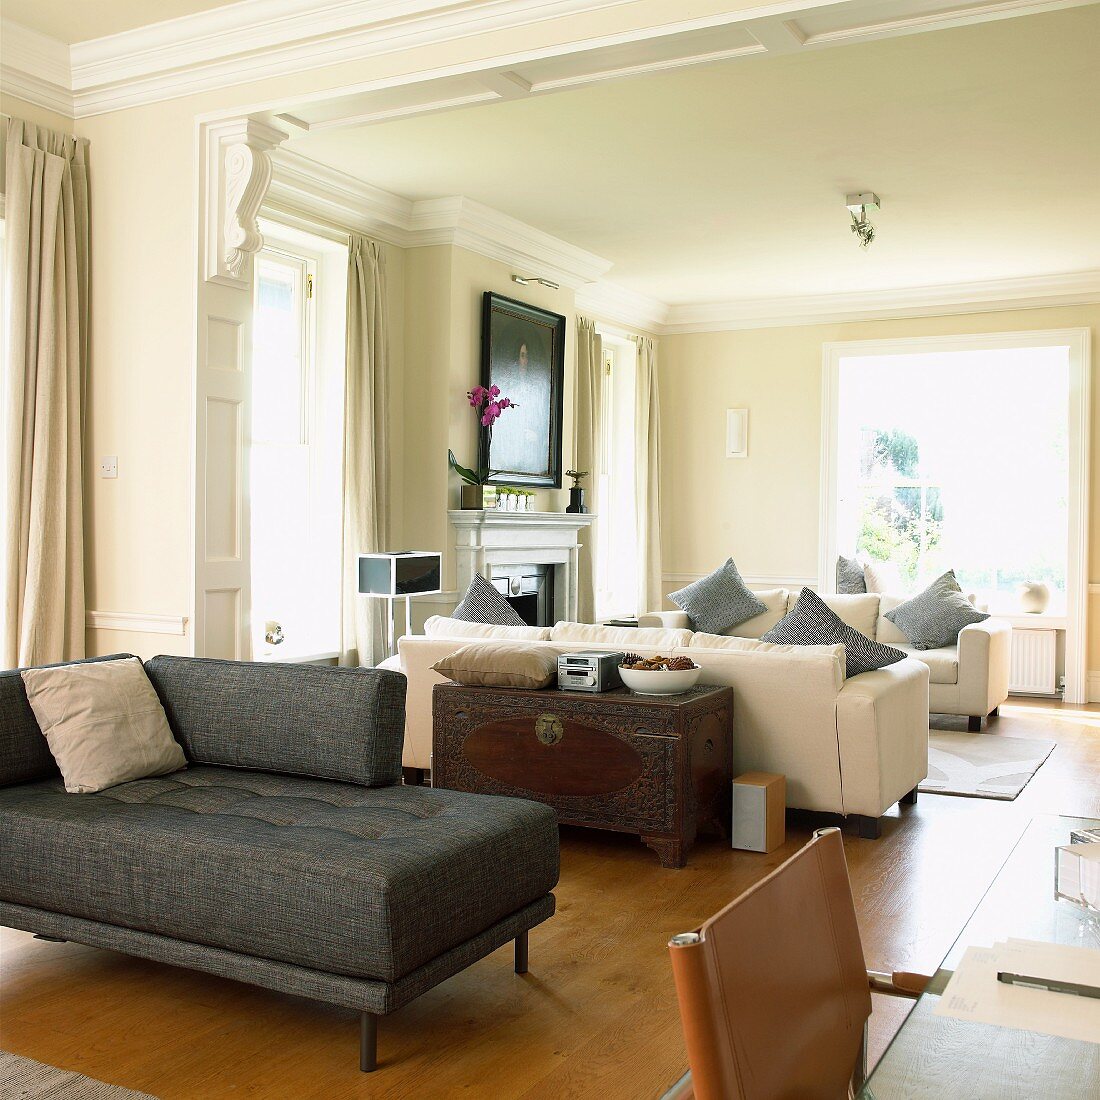 Sofas in long room with stucco ceiling